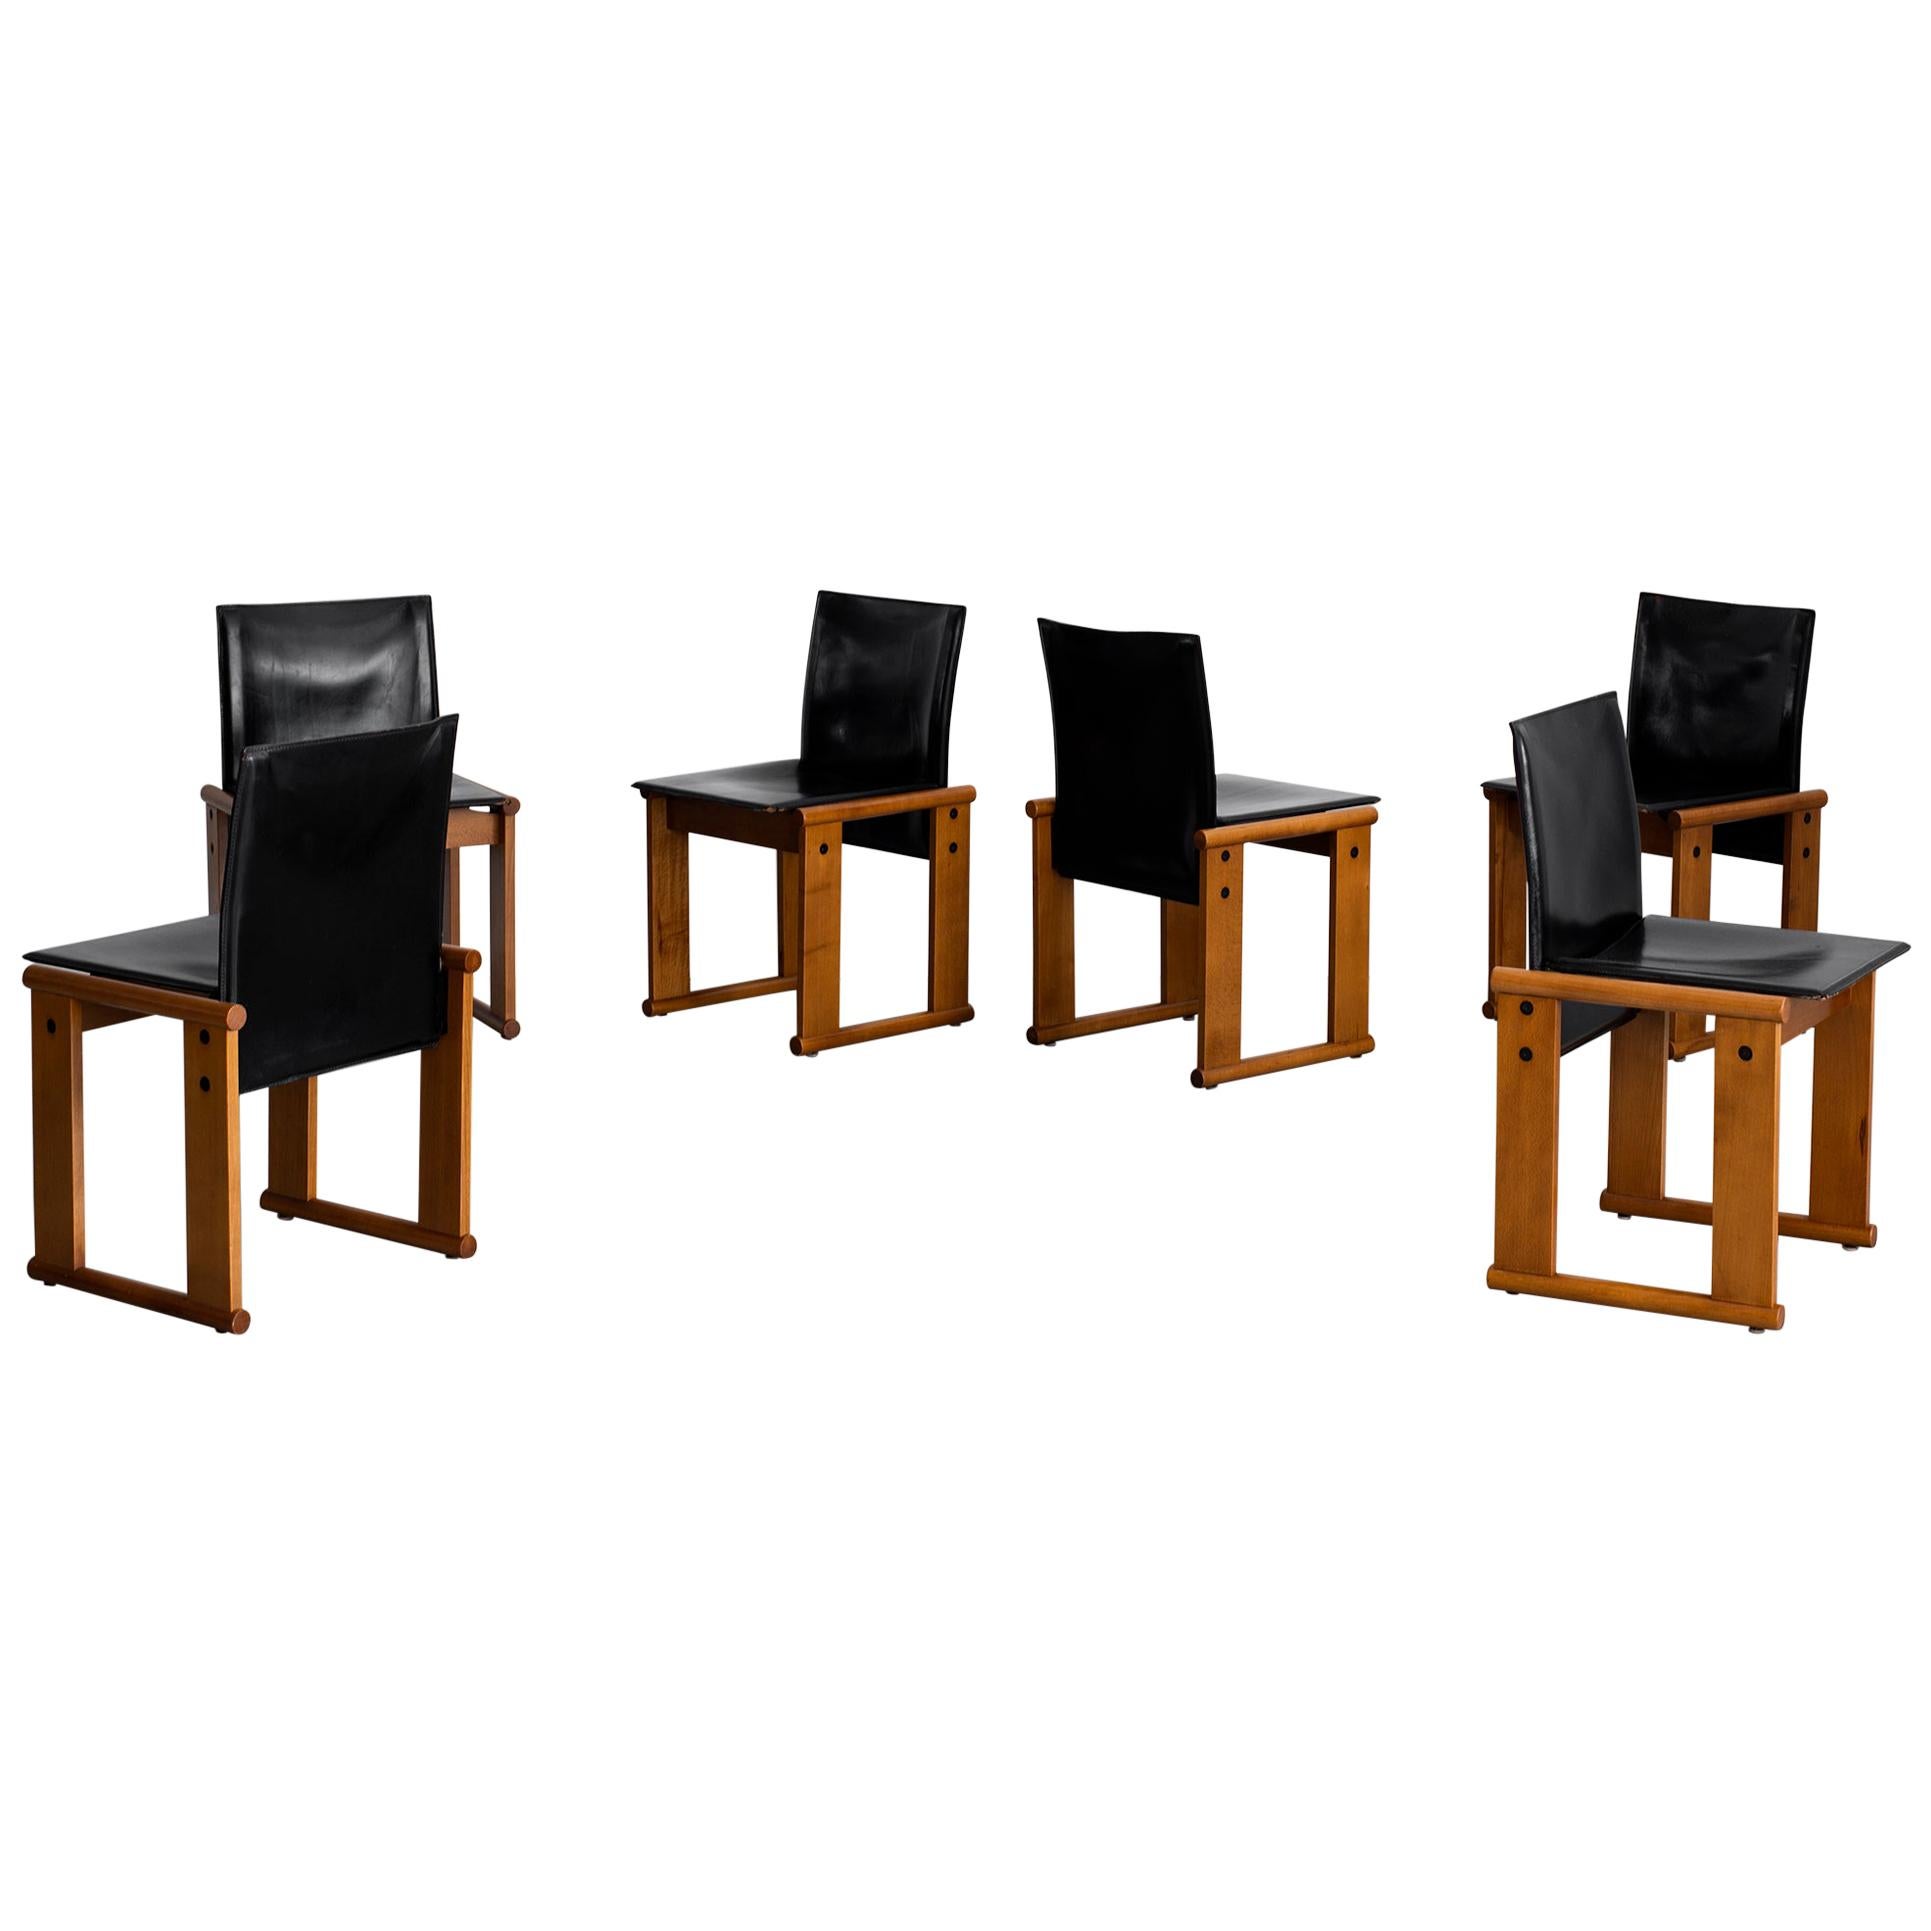 Afra & Tobia Scarpa "Monk" Chairs - Set of 6 